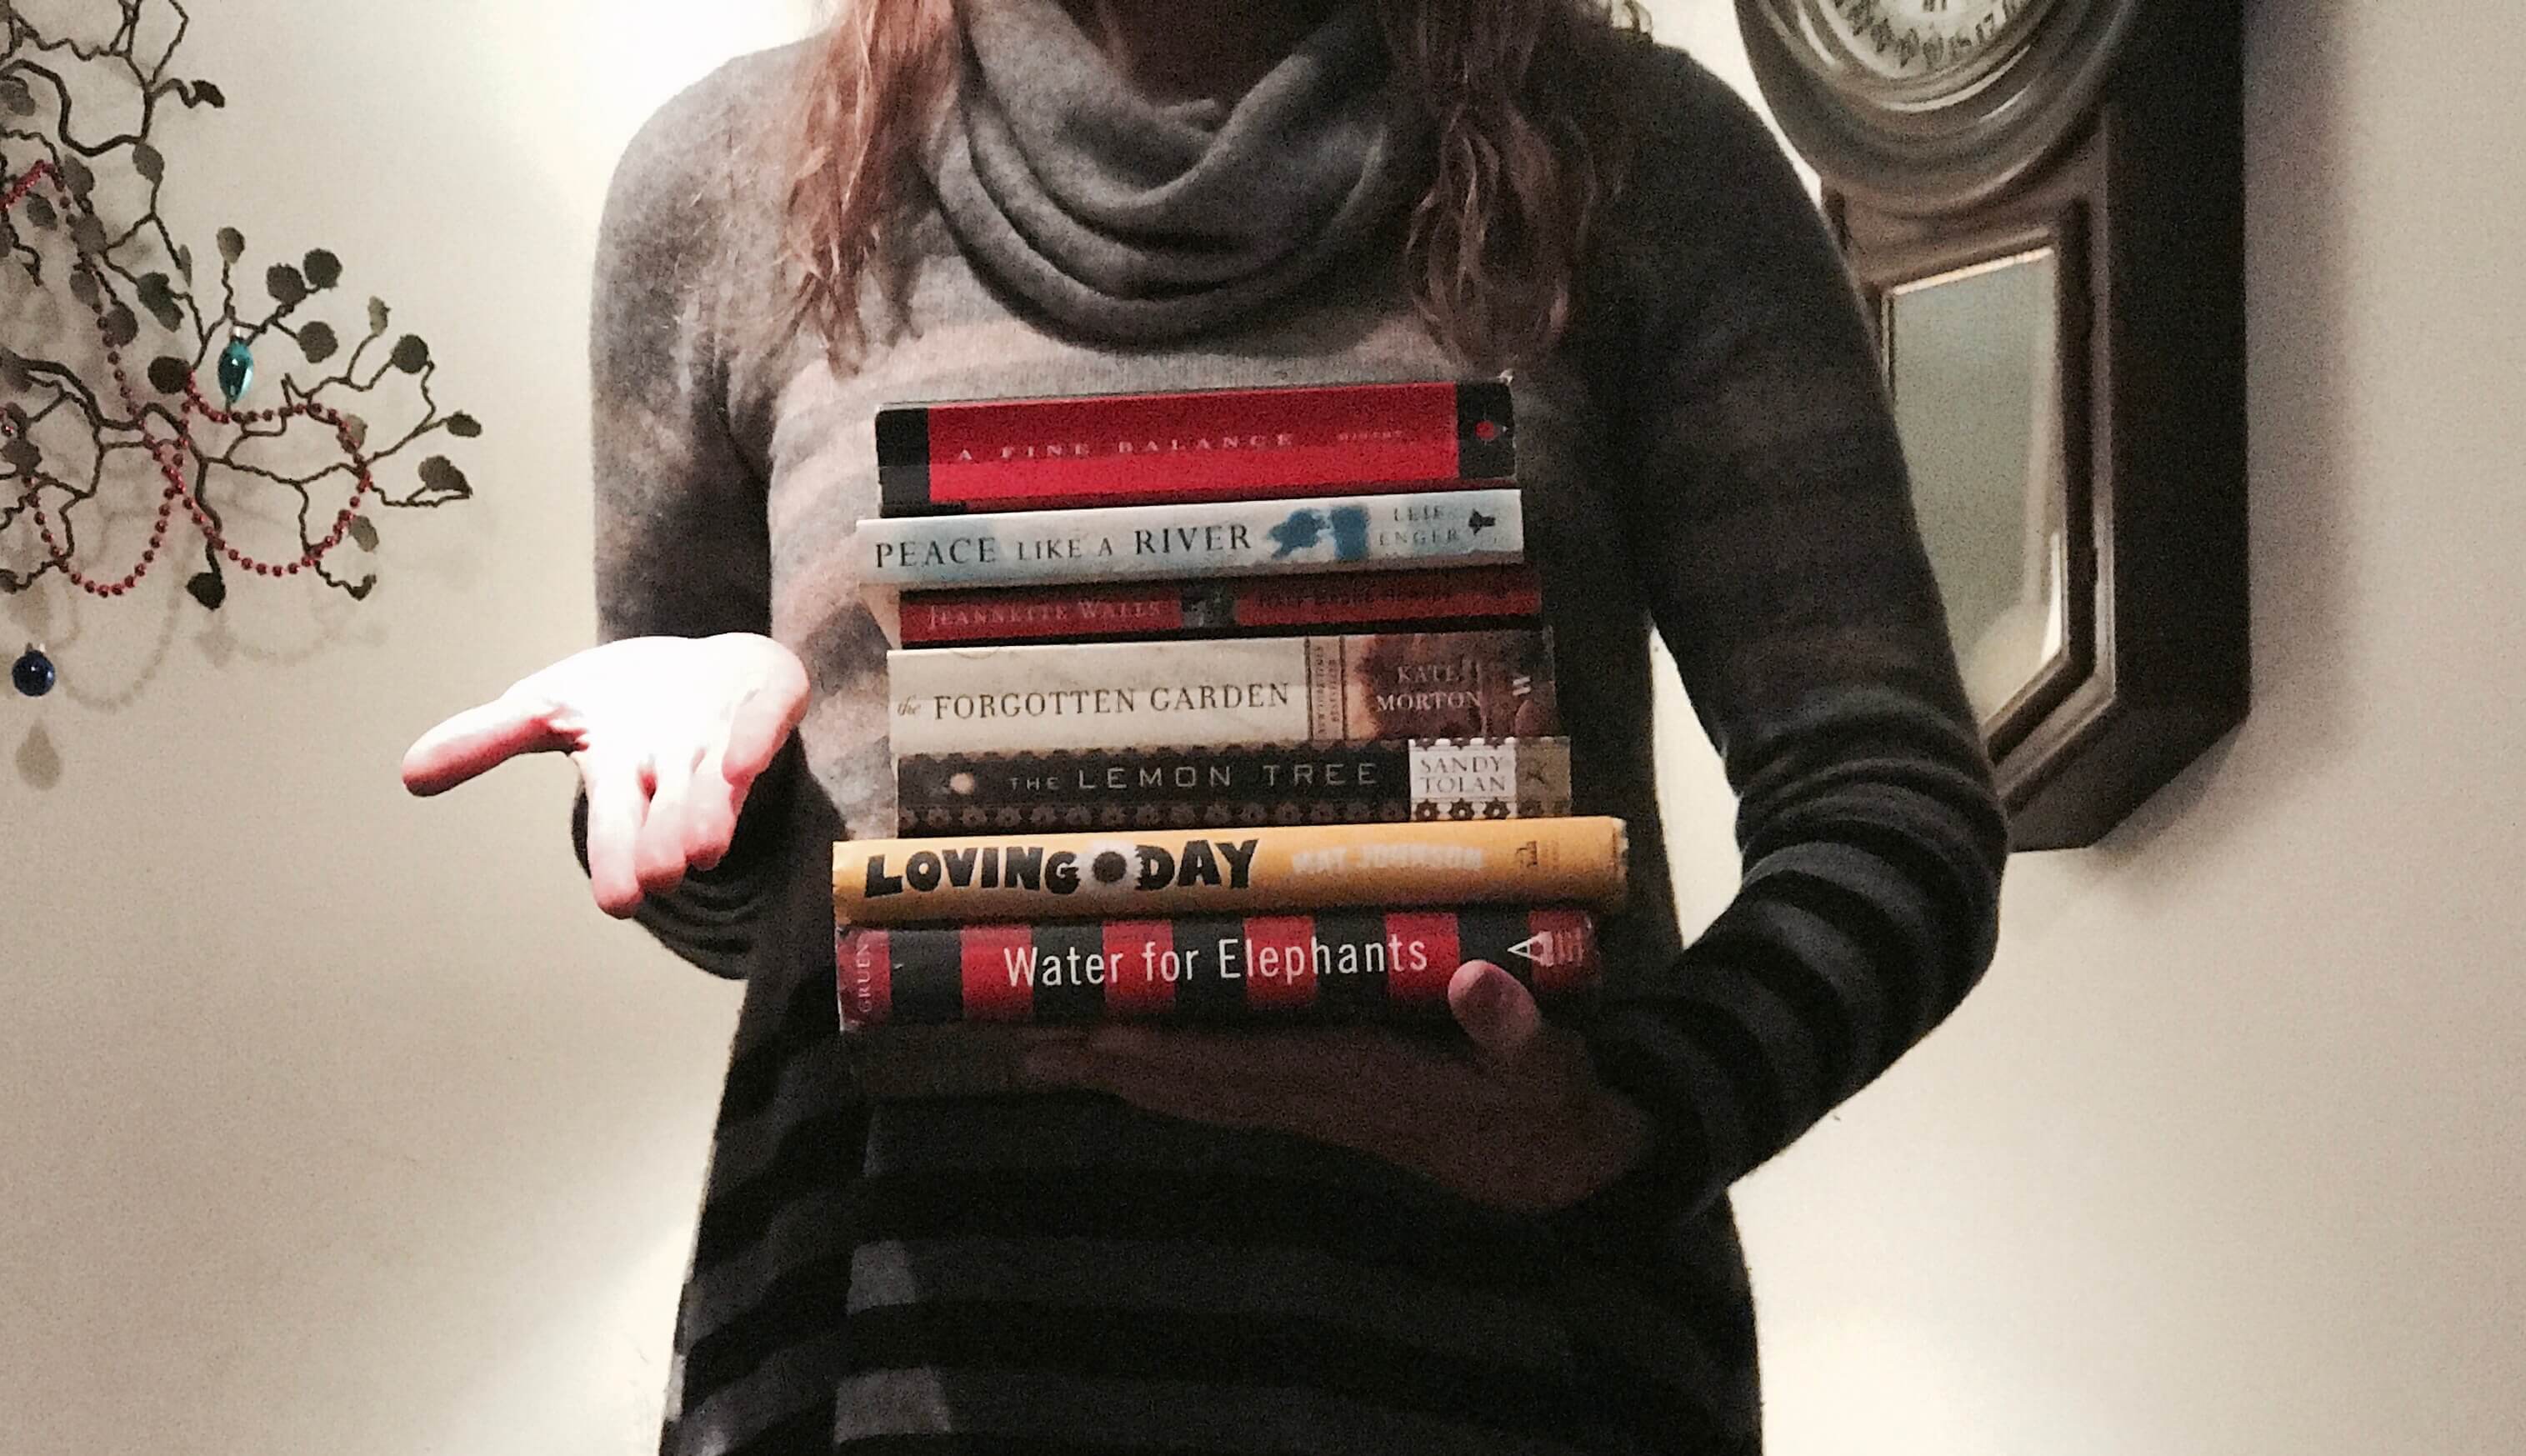 A Year’s Worth of Book Club Book Choices – From My Neighborhood Book Club